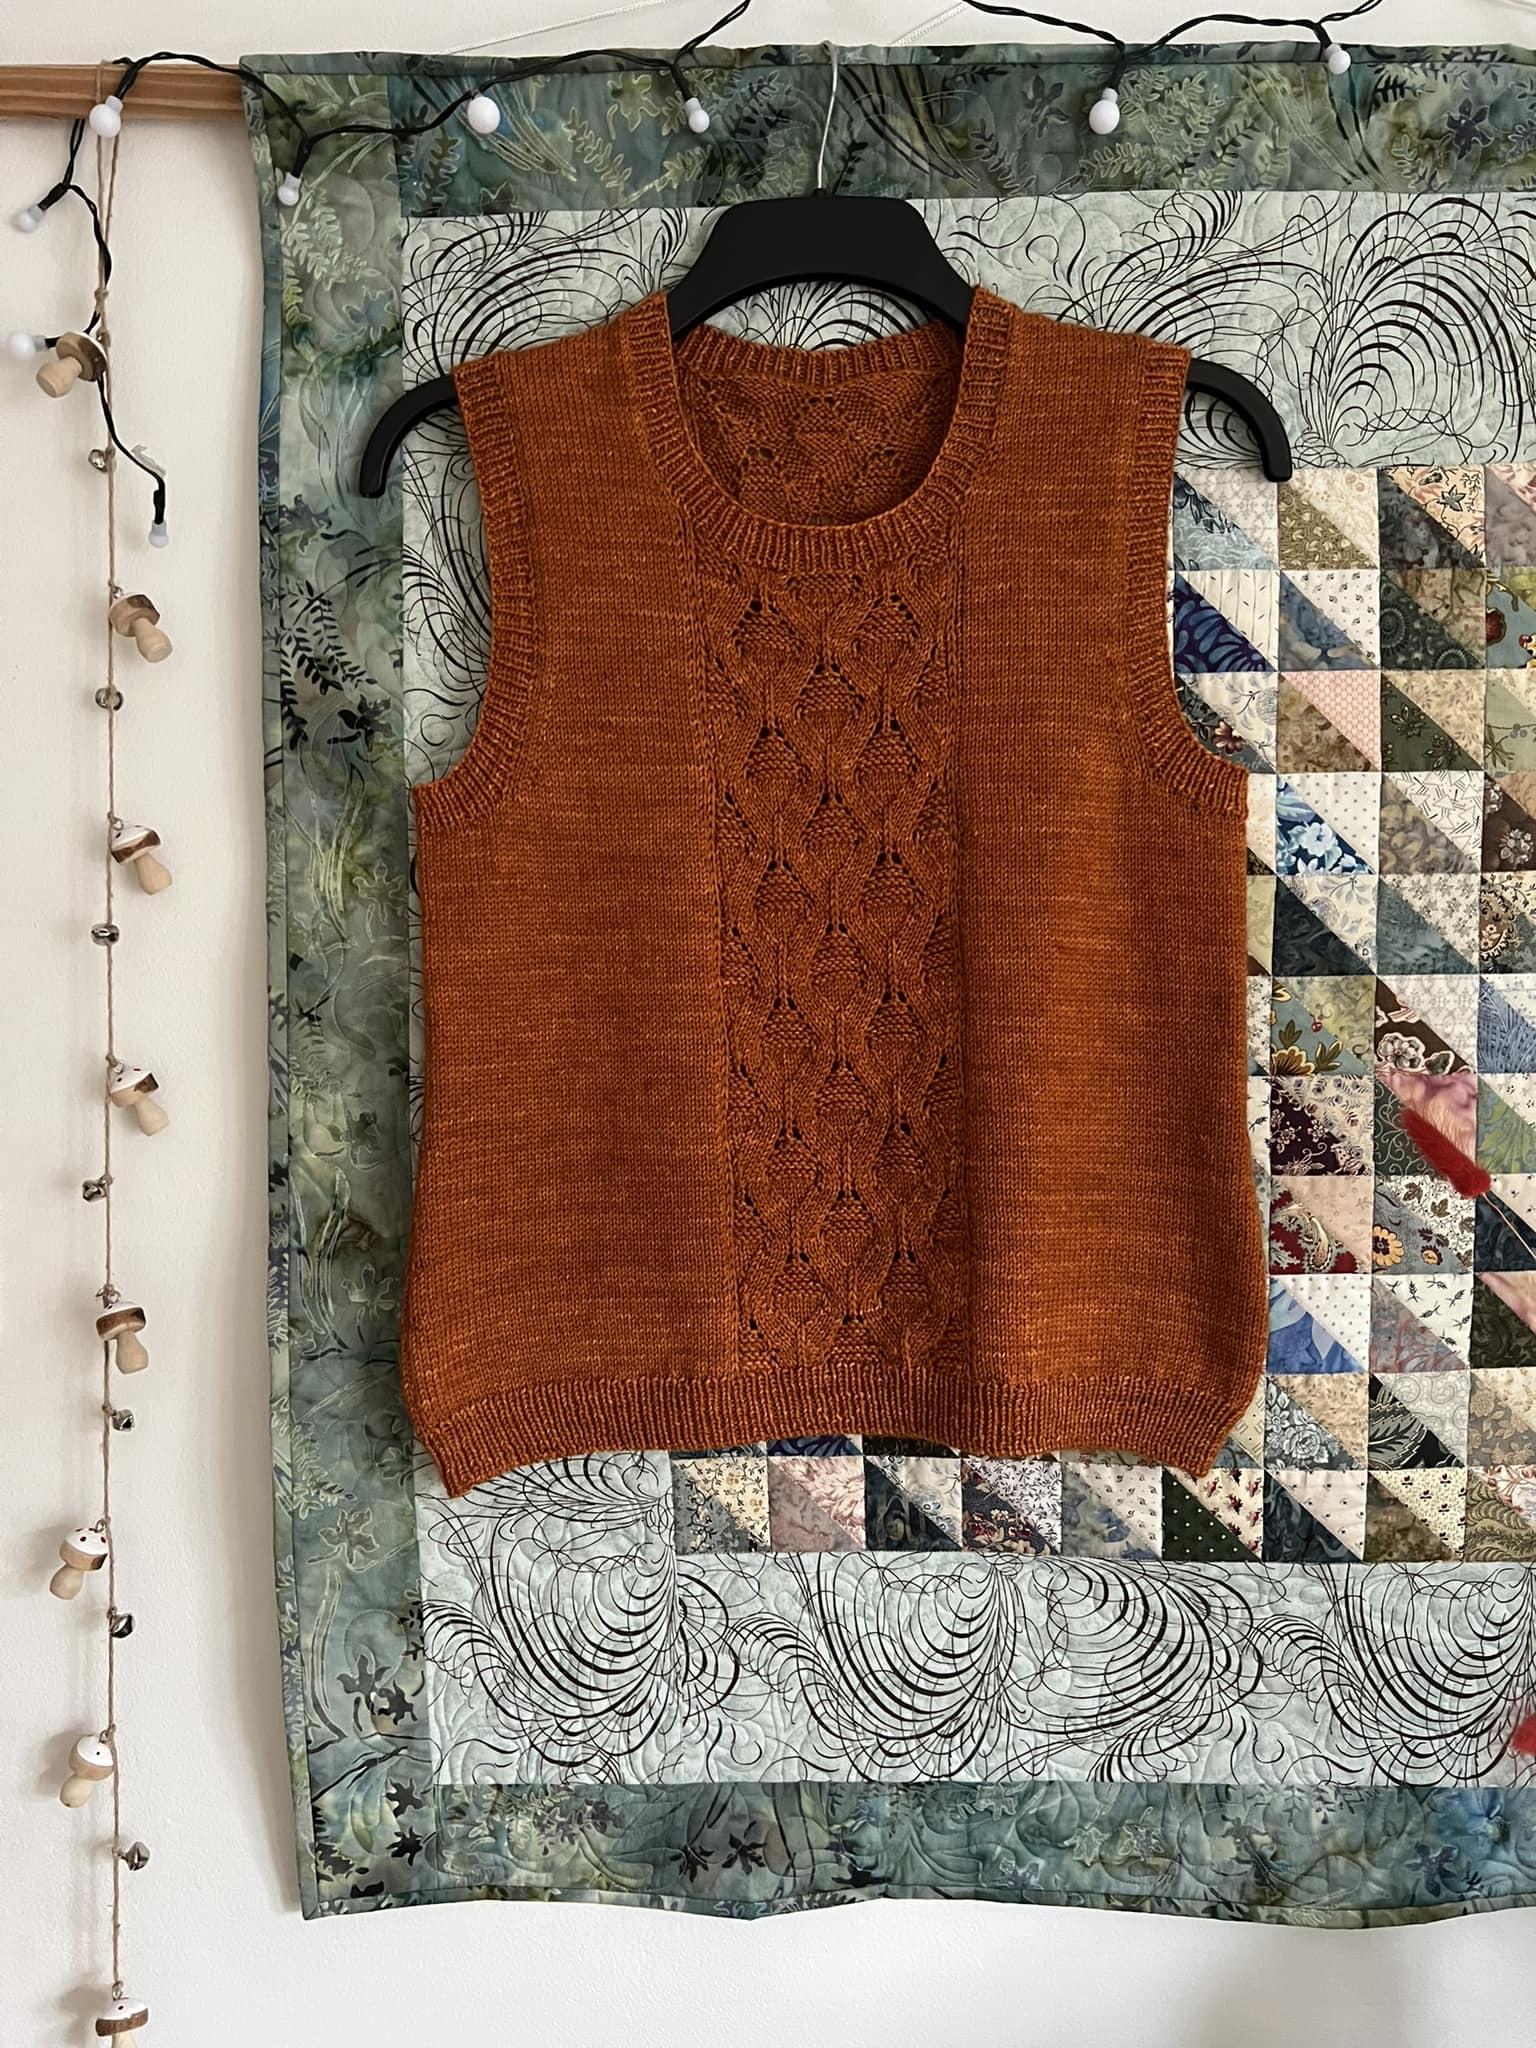 A rust coloured vest hanging in front of a patchwork quilt. The vest has a panel of cable details down the centre front